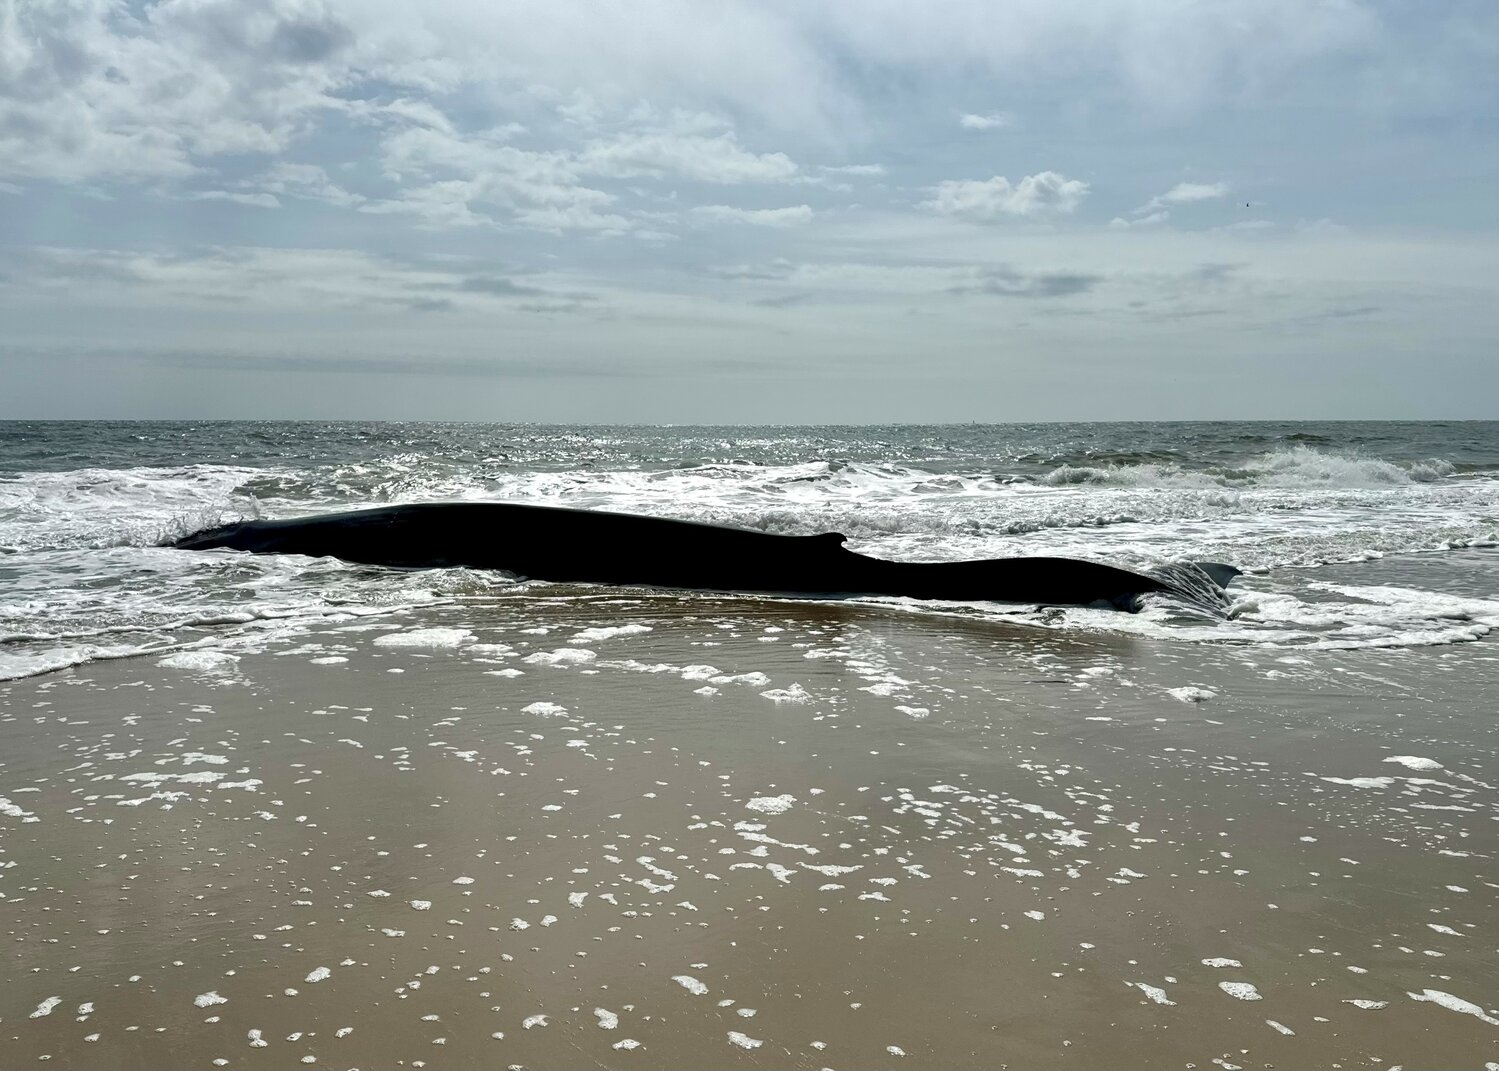 This fin whale beached itself Sunday morning, but did not survive until Monday morning, DNREC officials confirm. The age and gender of the 50 foot long animal has not been released, and no plans have been made public for the body, as of Monday afternoon.